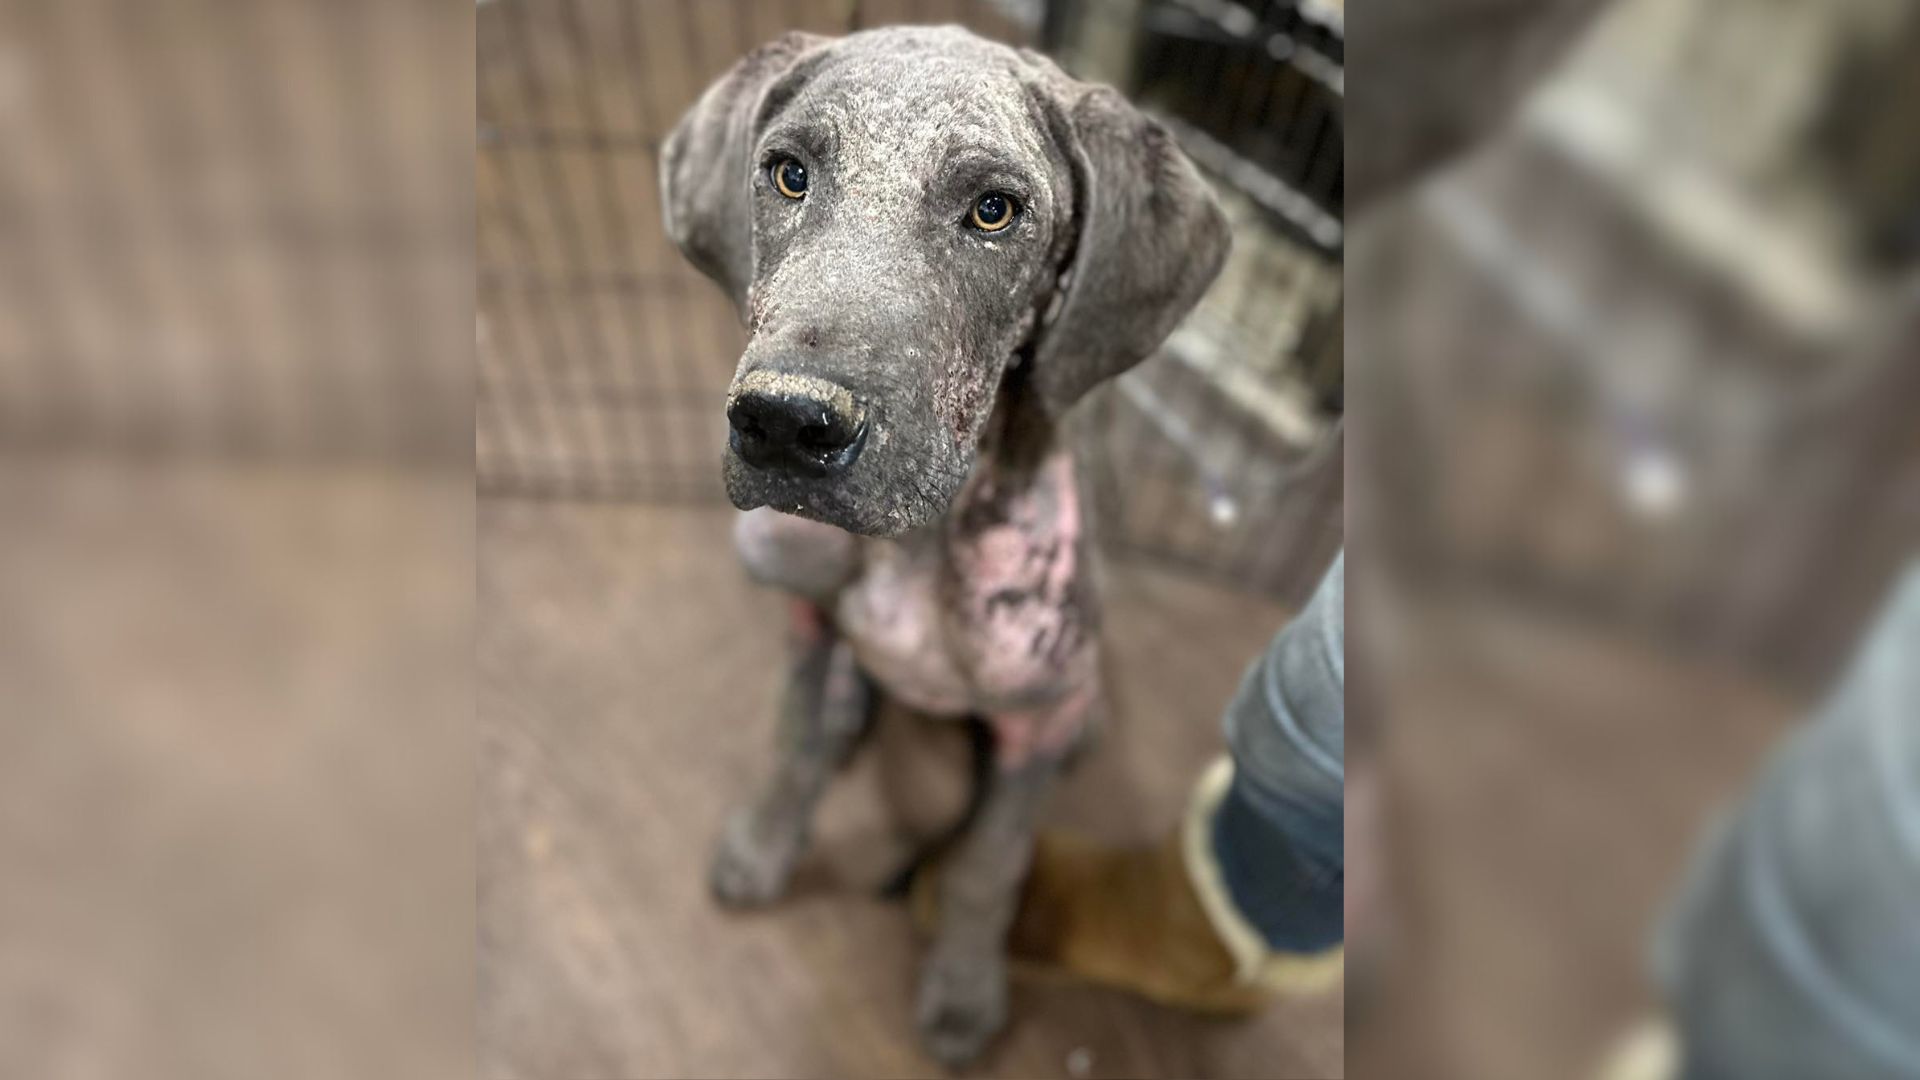 Rescuers Were Shocked When They Saw This Malnourished Great Dane So They Rushed To Help 